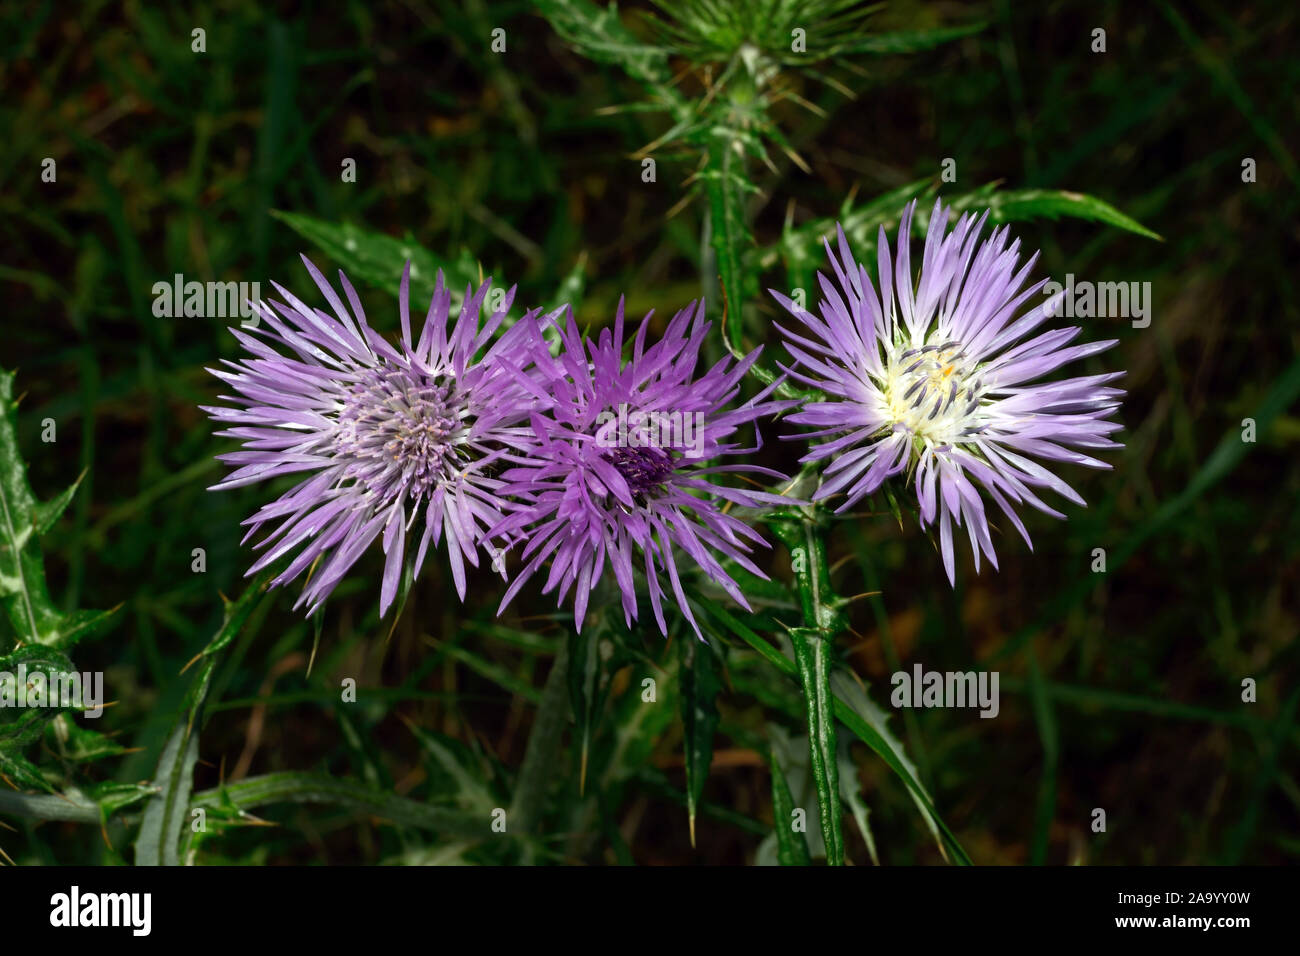 Galactites tomentosa (purple milk thistle) is a biennial herb usually found on barren ground or pastures. It is native to Mediterranean countries. Stock Photo